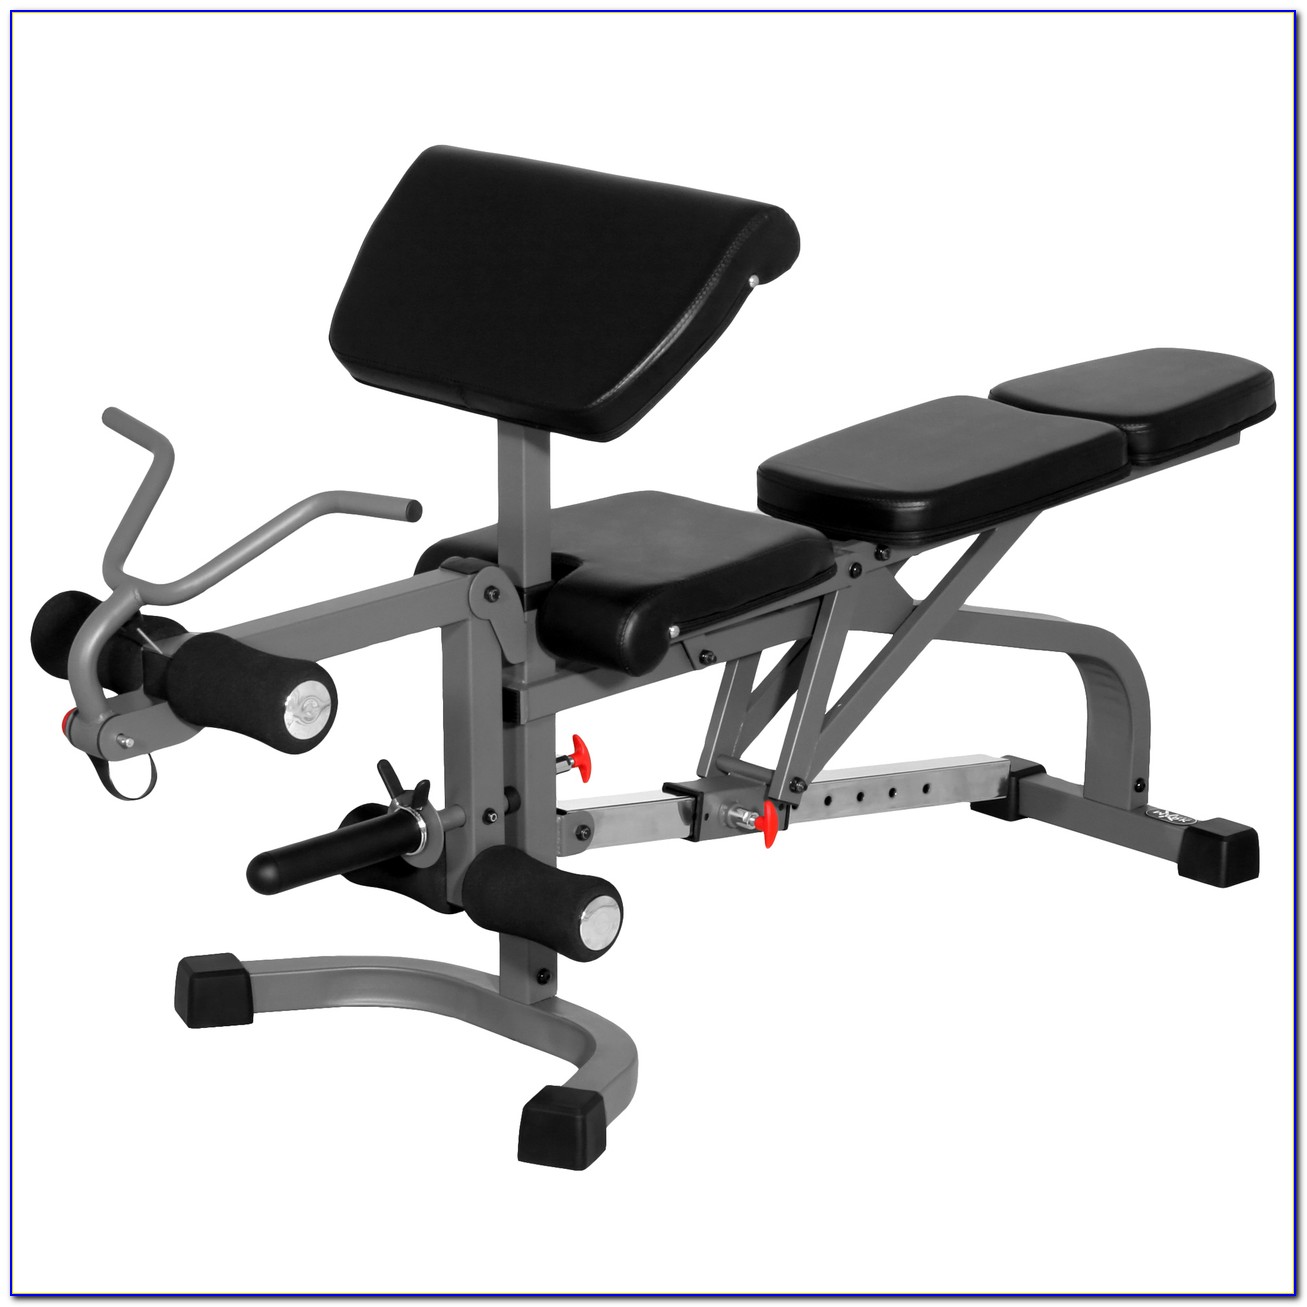 Marcy Weight Bench Leg Attachment - Bench : Home Design Ideas #